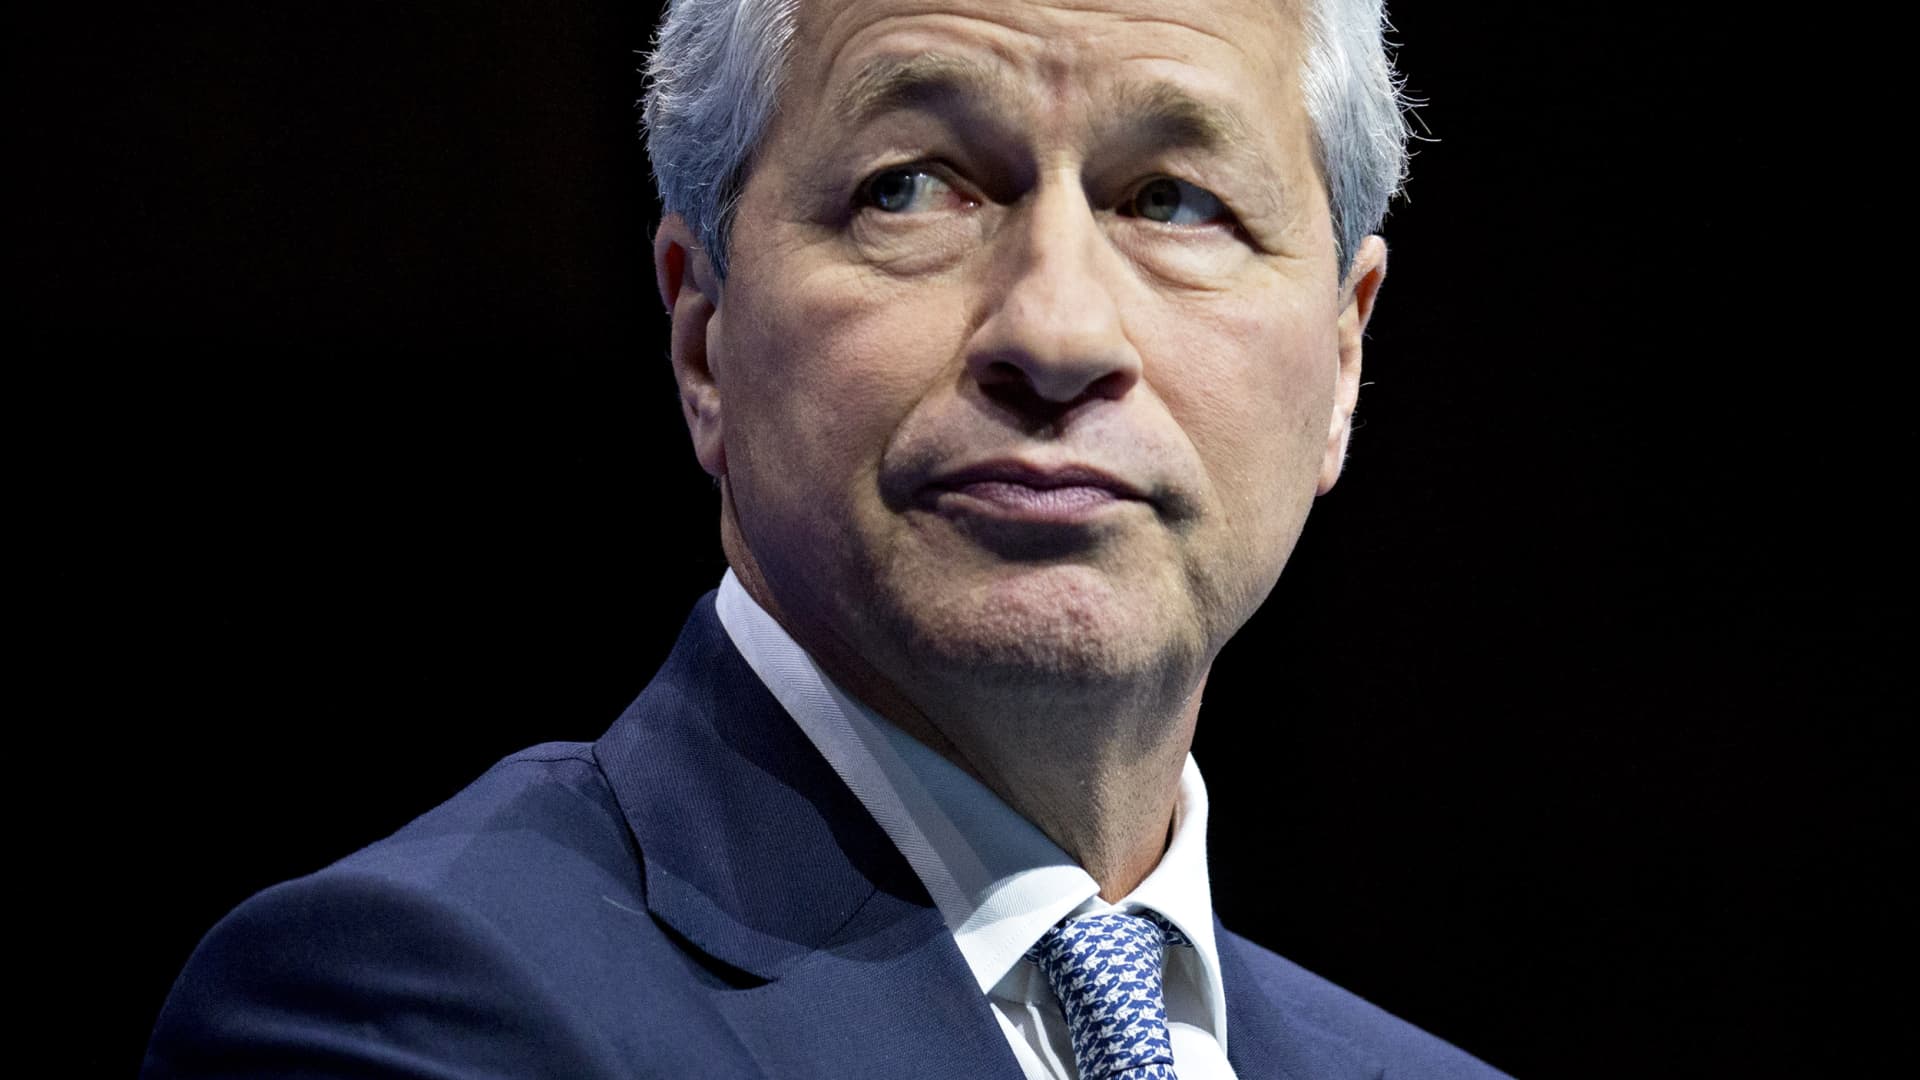 Jamie Dimon sees ‘storm clouds’ ahead for U.S. economy later this year